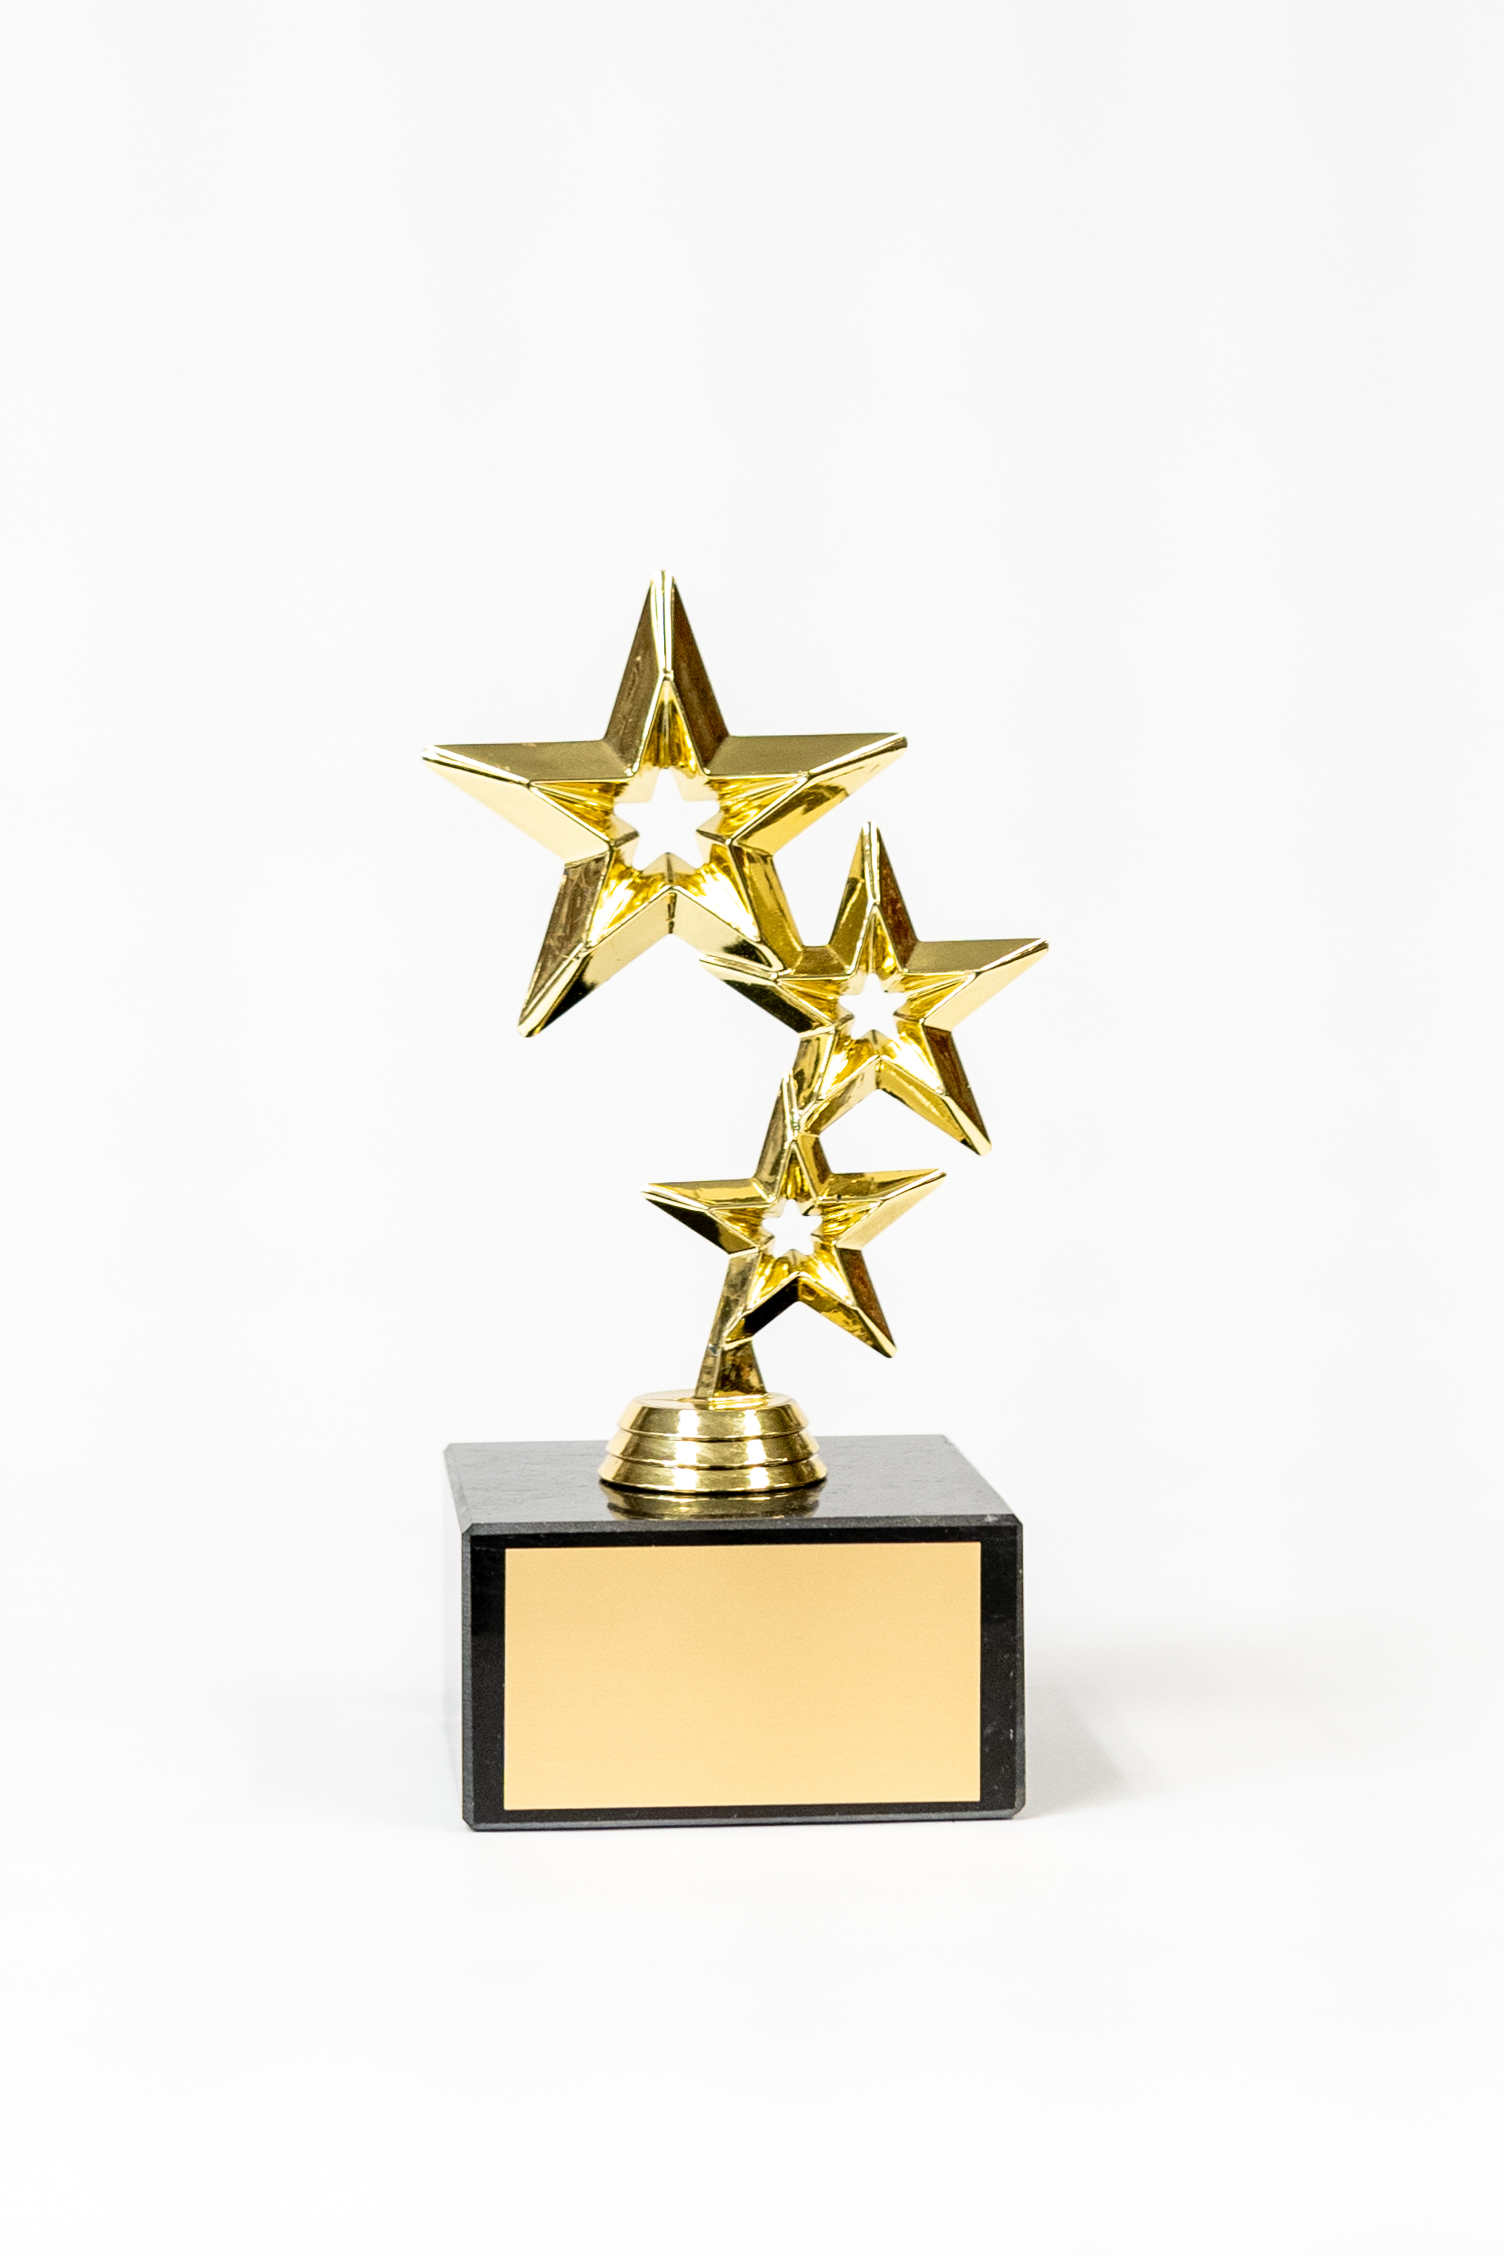 Gold and Green Modern Star Cups Dance Achievement Trophies FREE Engraving 